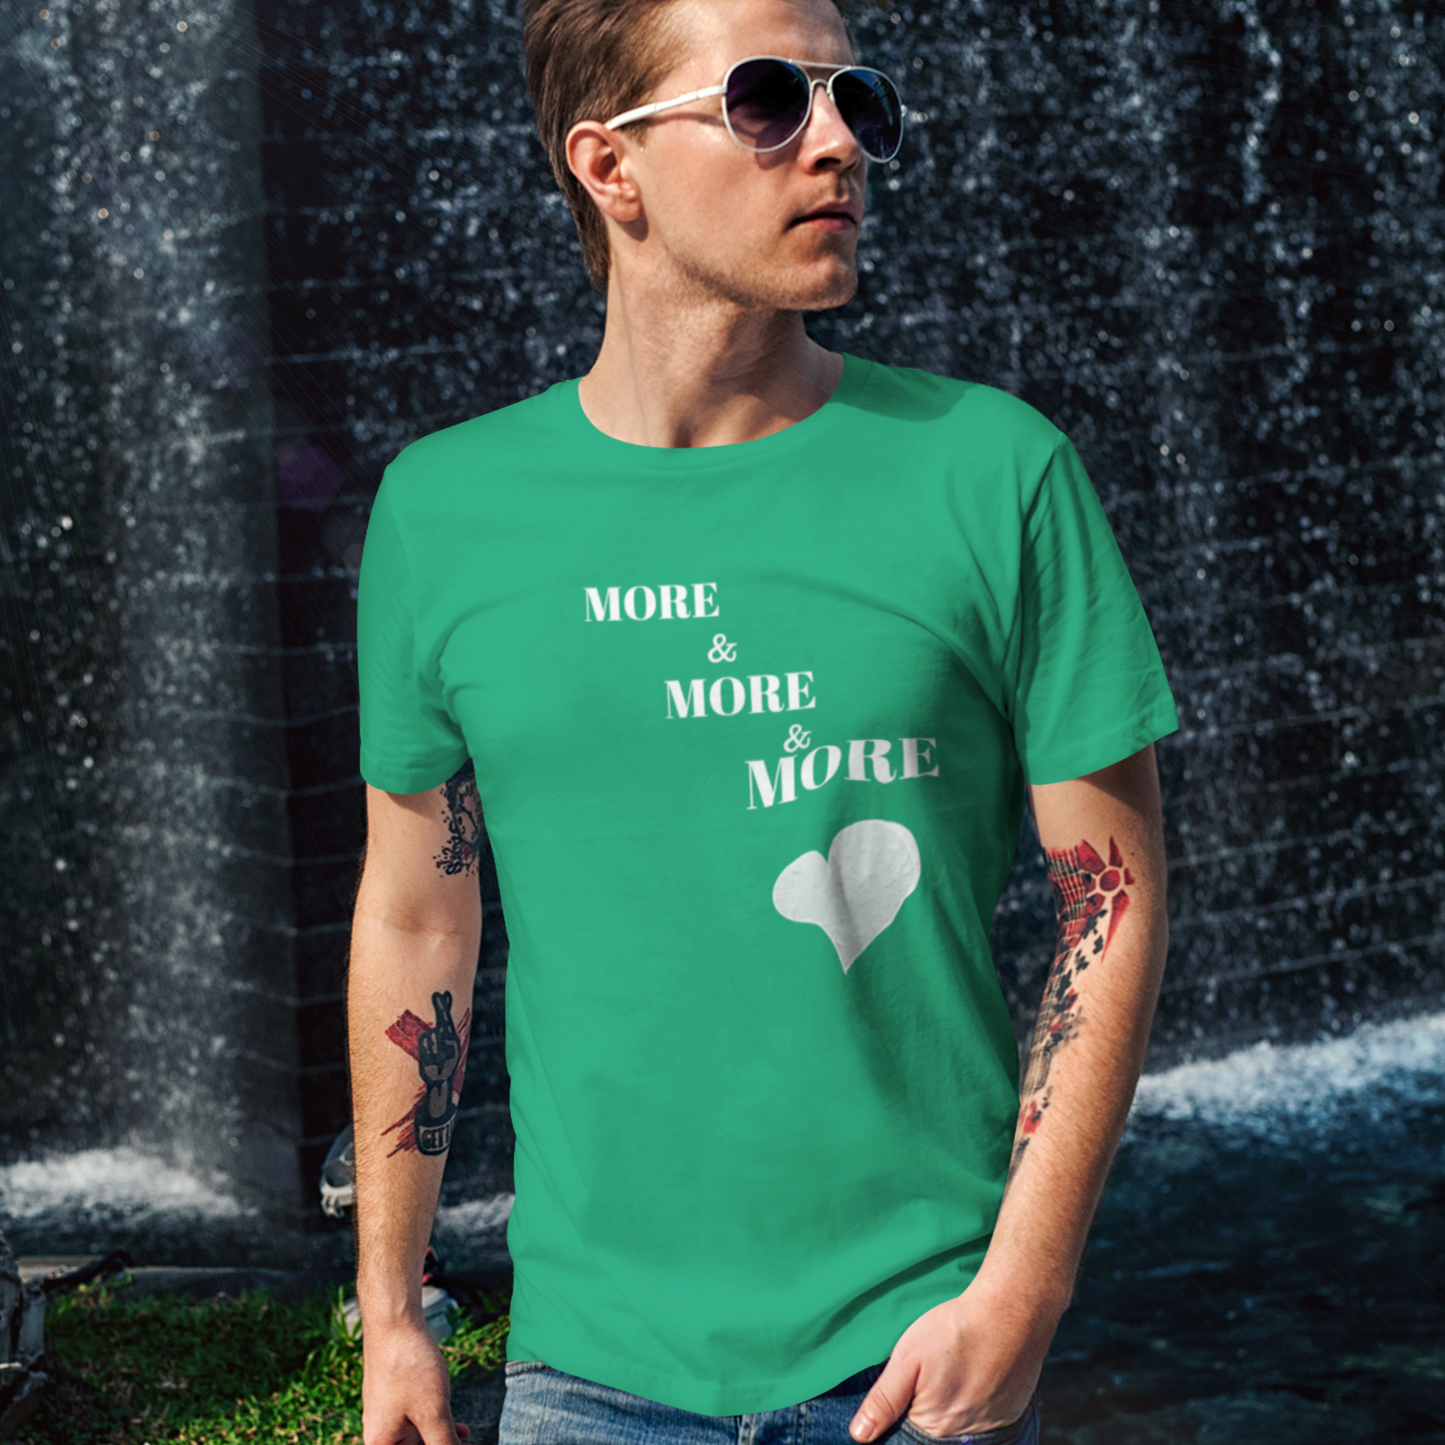 More and more and more love tshirt  gift, t shirt gift for love, T shirt gift that celebrates self love